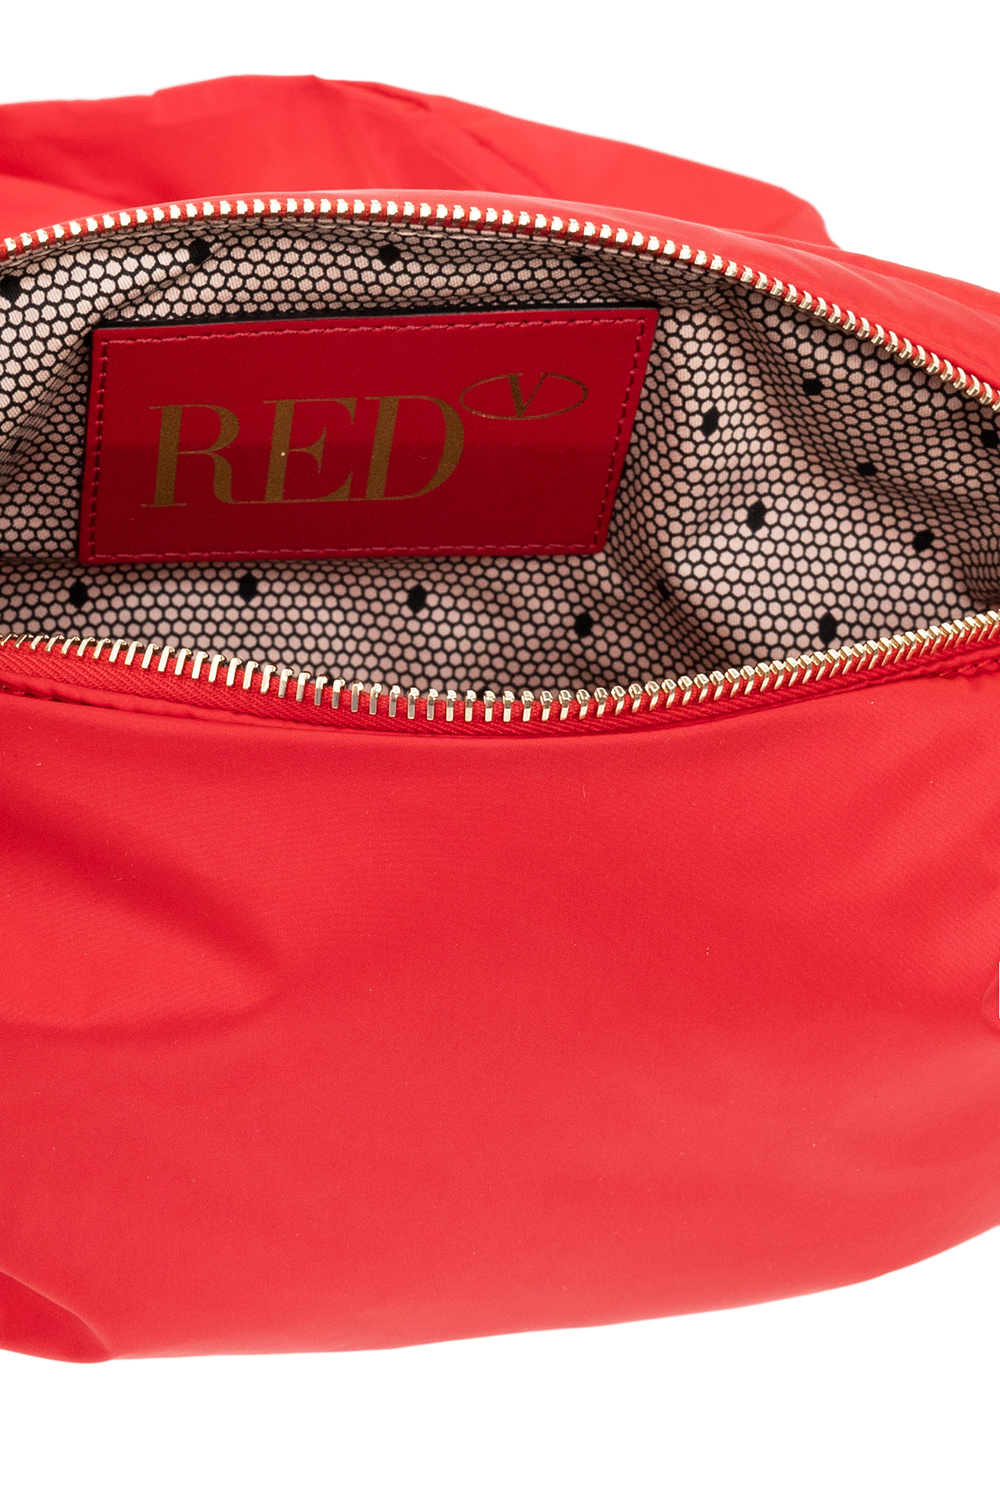 Red Shoulder bag with bow Red Valentino - Vitkac GB